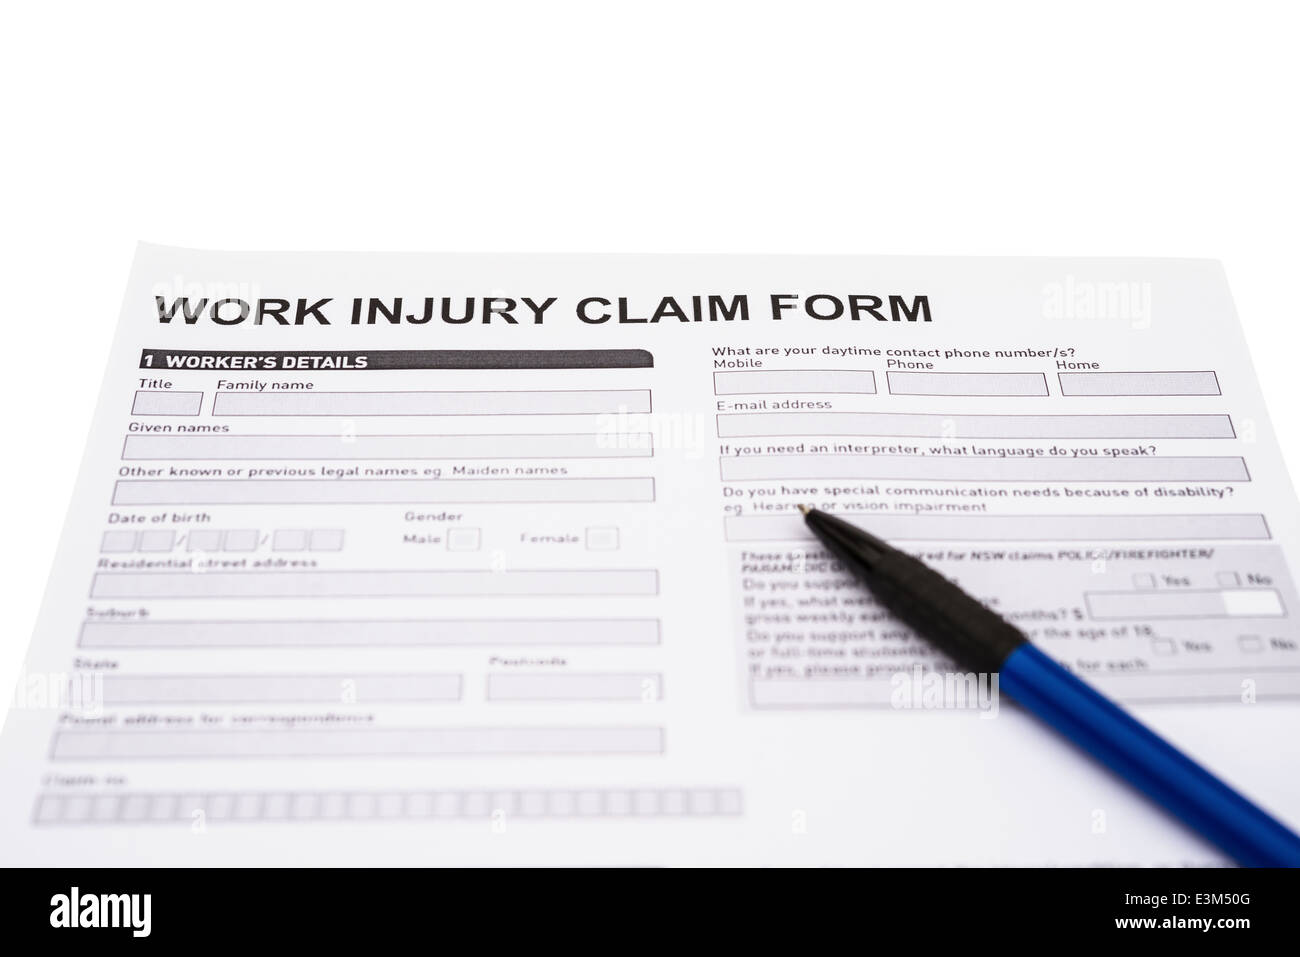 work injury claim form on white with clipping path Stock Photo